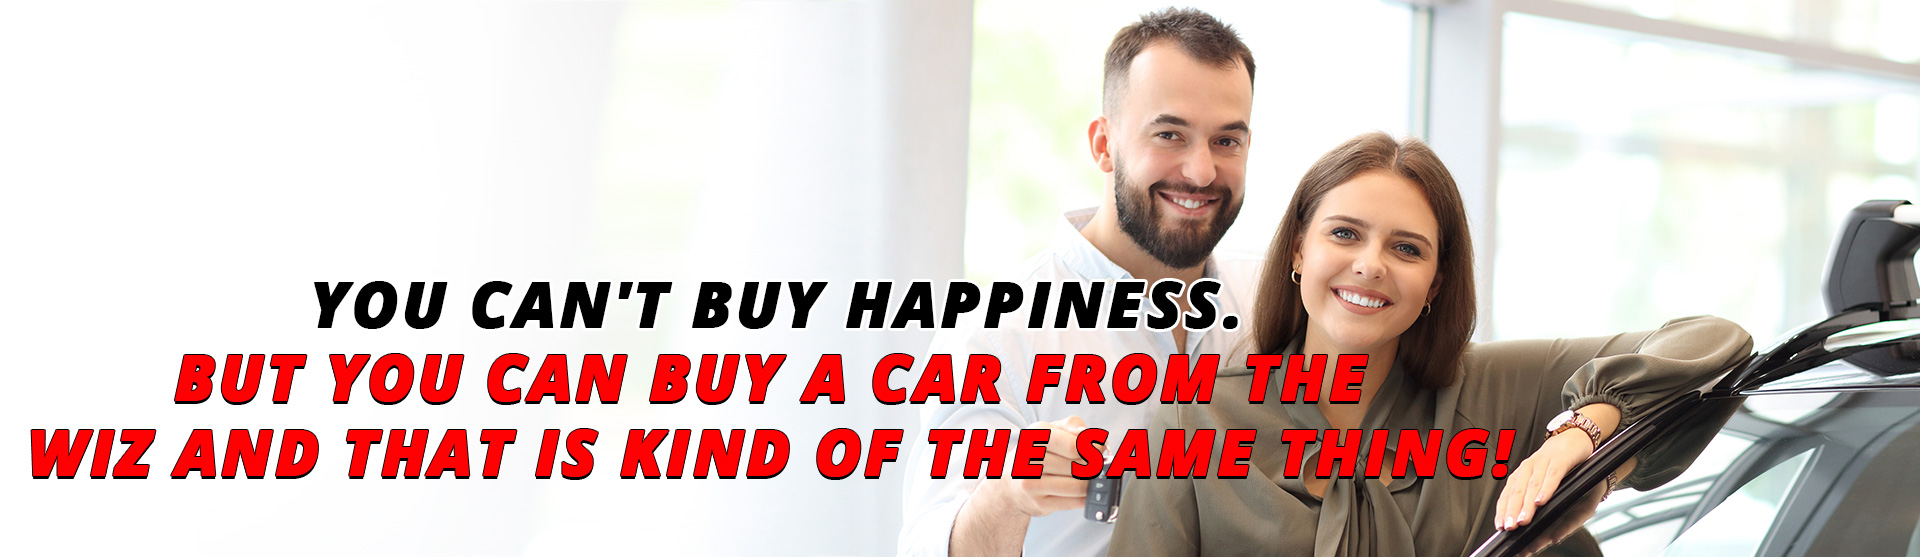 You can't buy happiness. But you can buy a car from the Wiz and that is kind of the same thing!